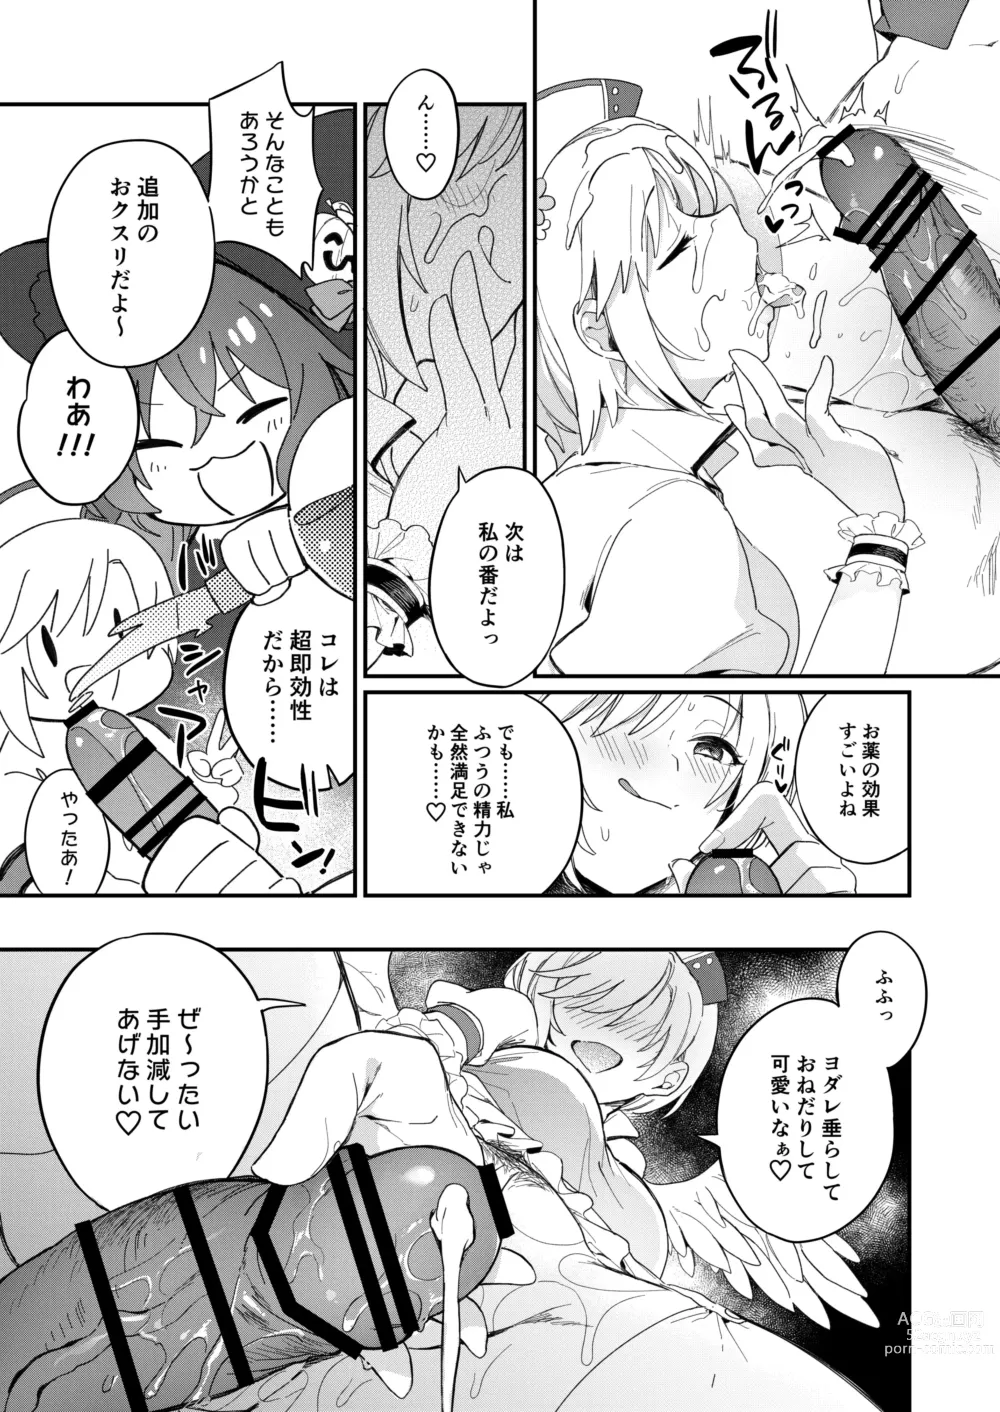 Page 18 of doujinshi Harem Halloween Party